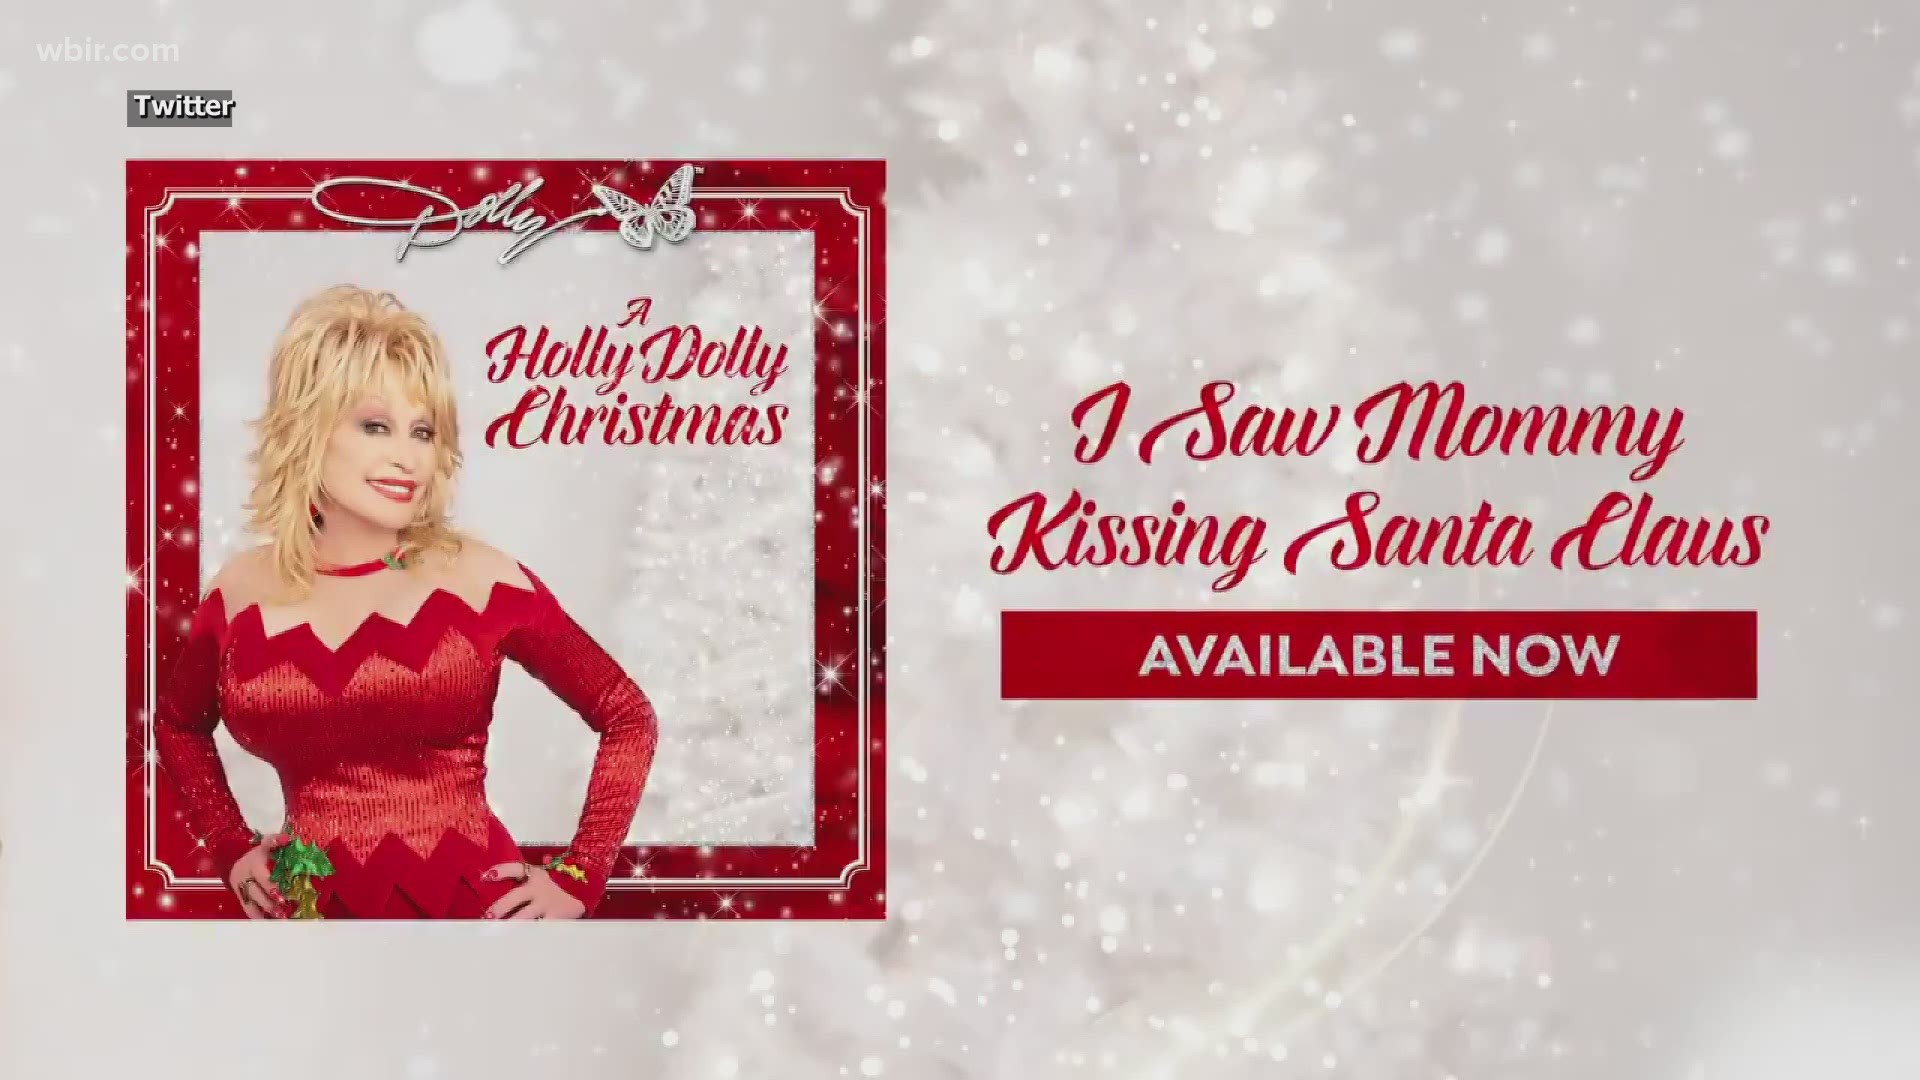 Dolly "Saw Mommy Kissing Santa Claus" as part of her new Holly Dolly Christmas album, available October 2.